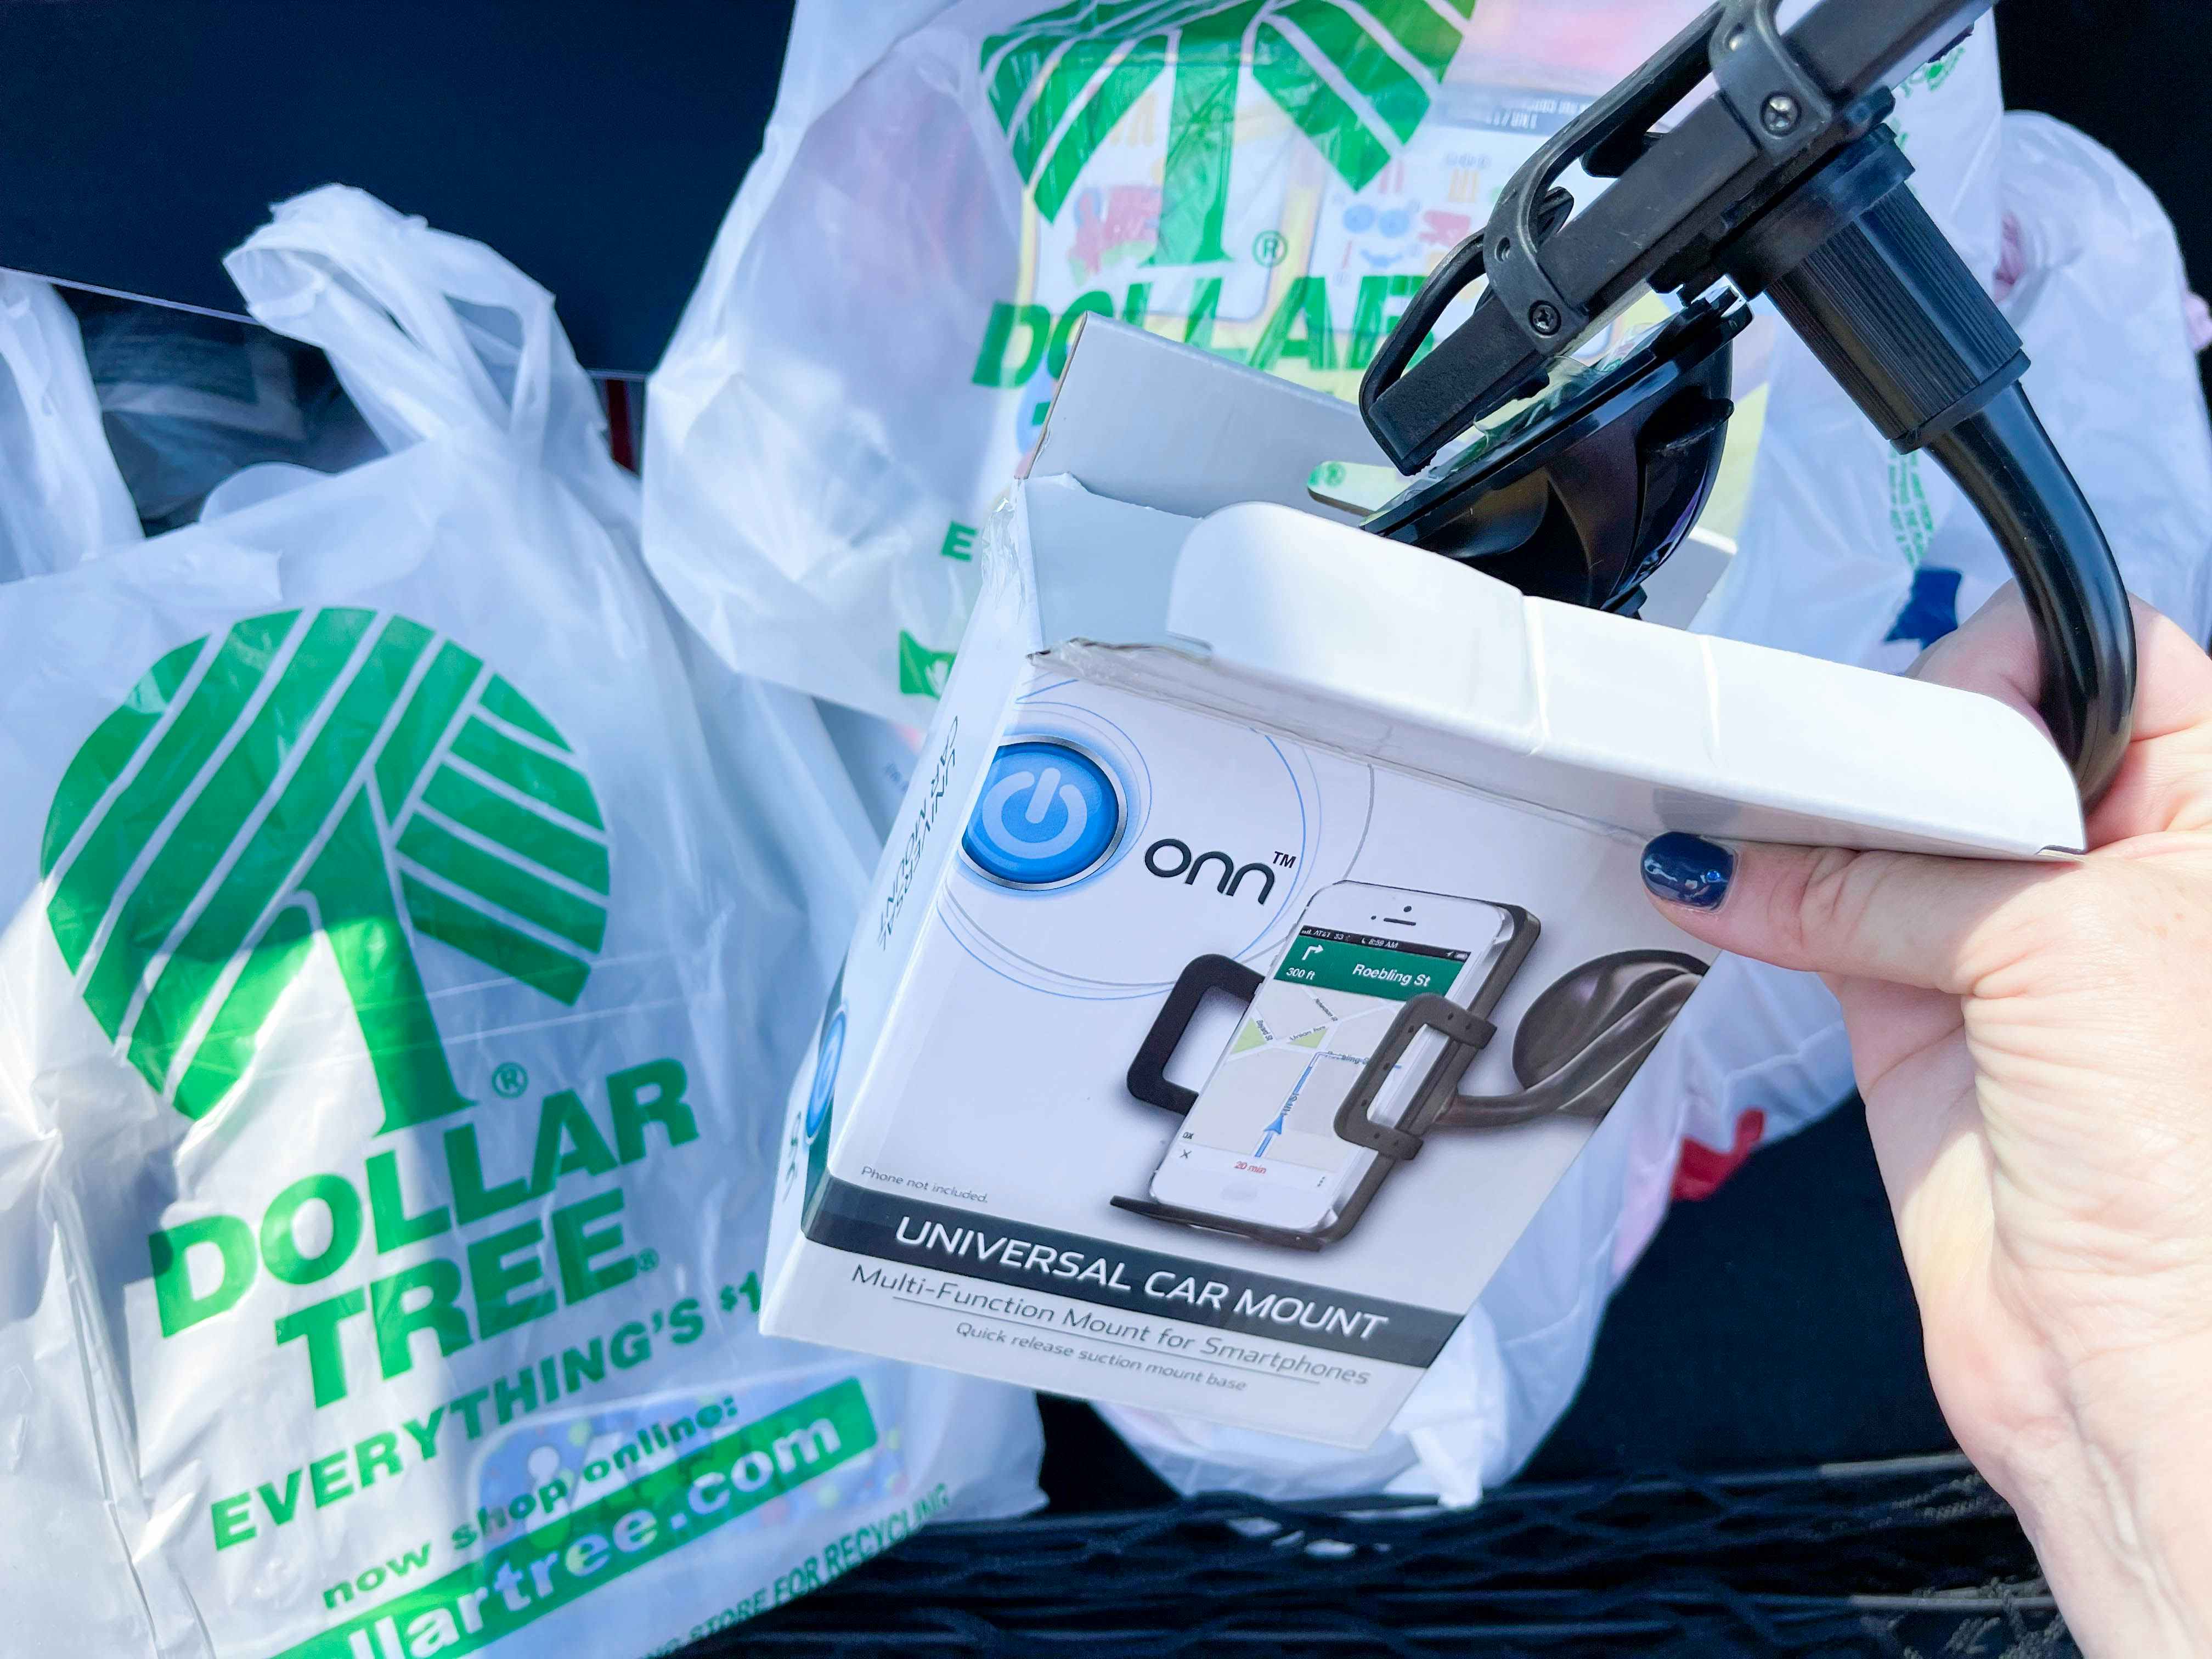 cellphone car mount out if box in front of dollar tree bags